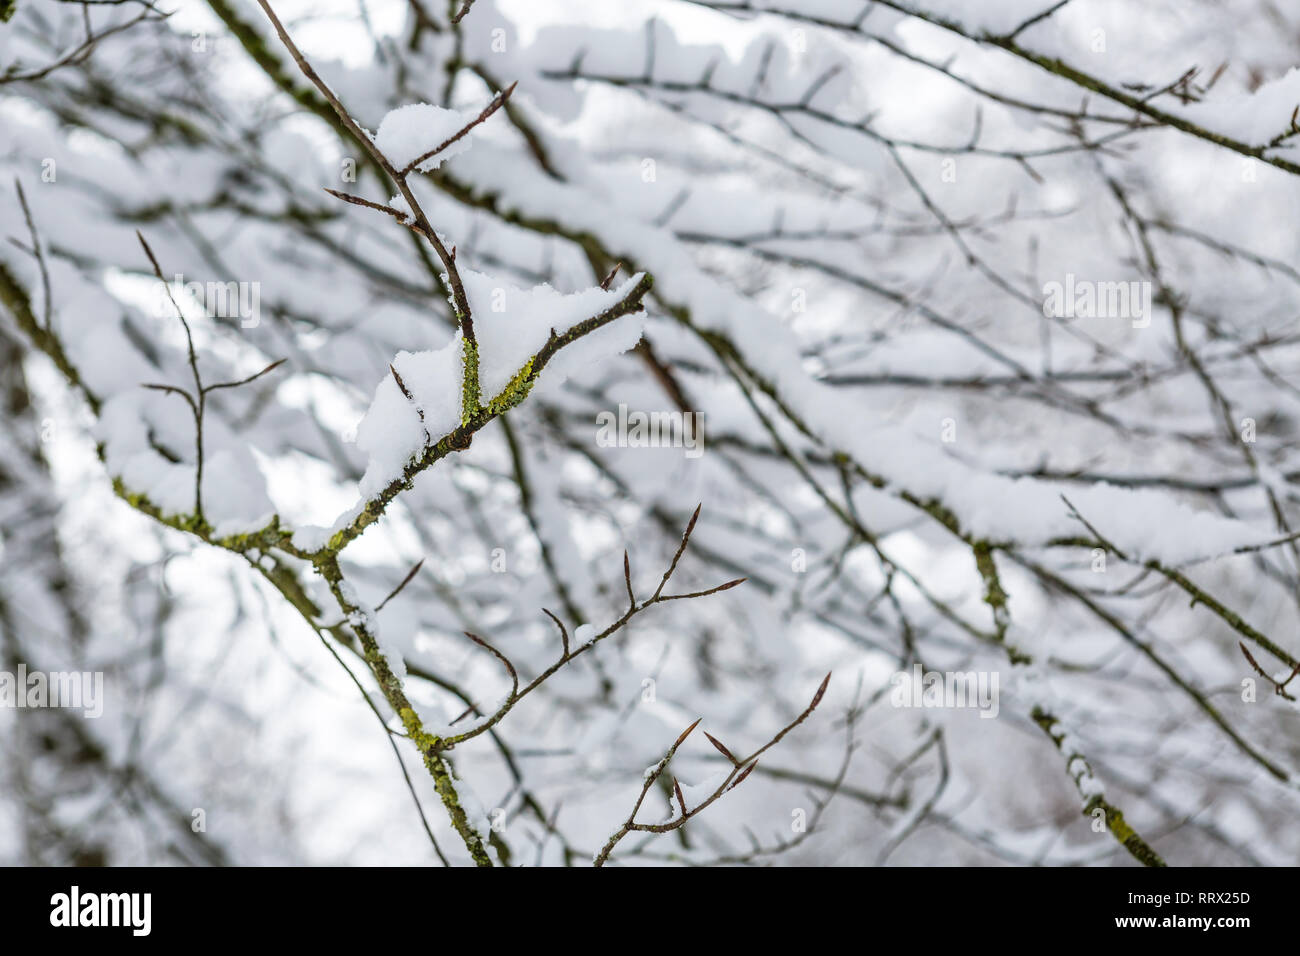 Close up of are branches covered in snow Stock Photo